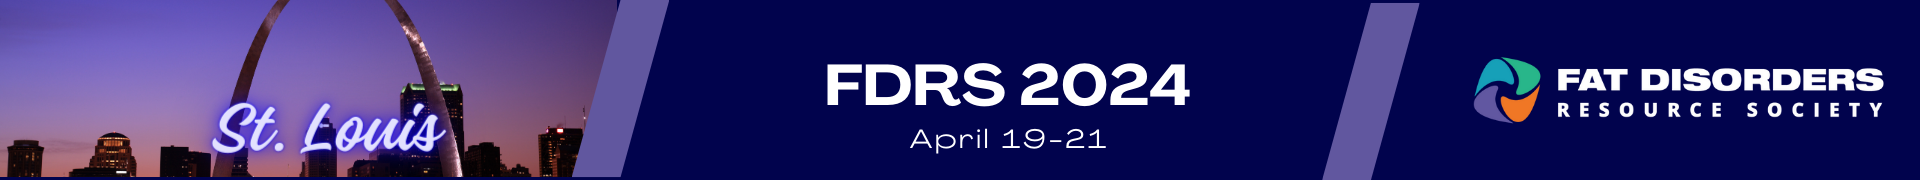 FDRS 2024 Event Banner